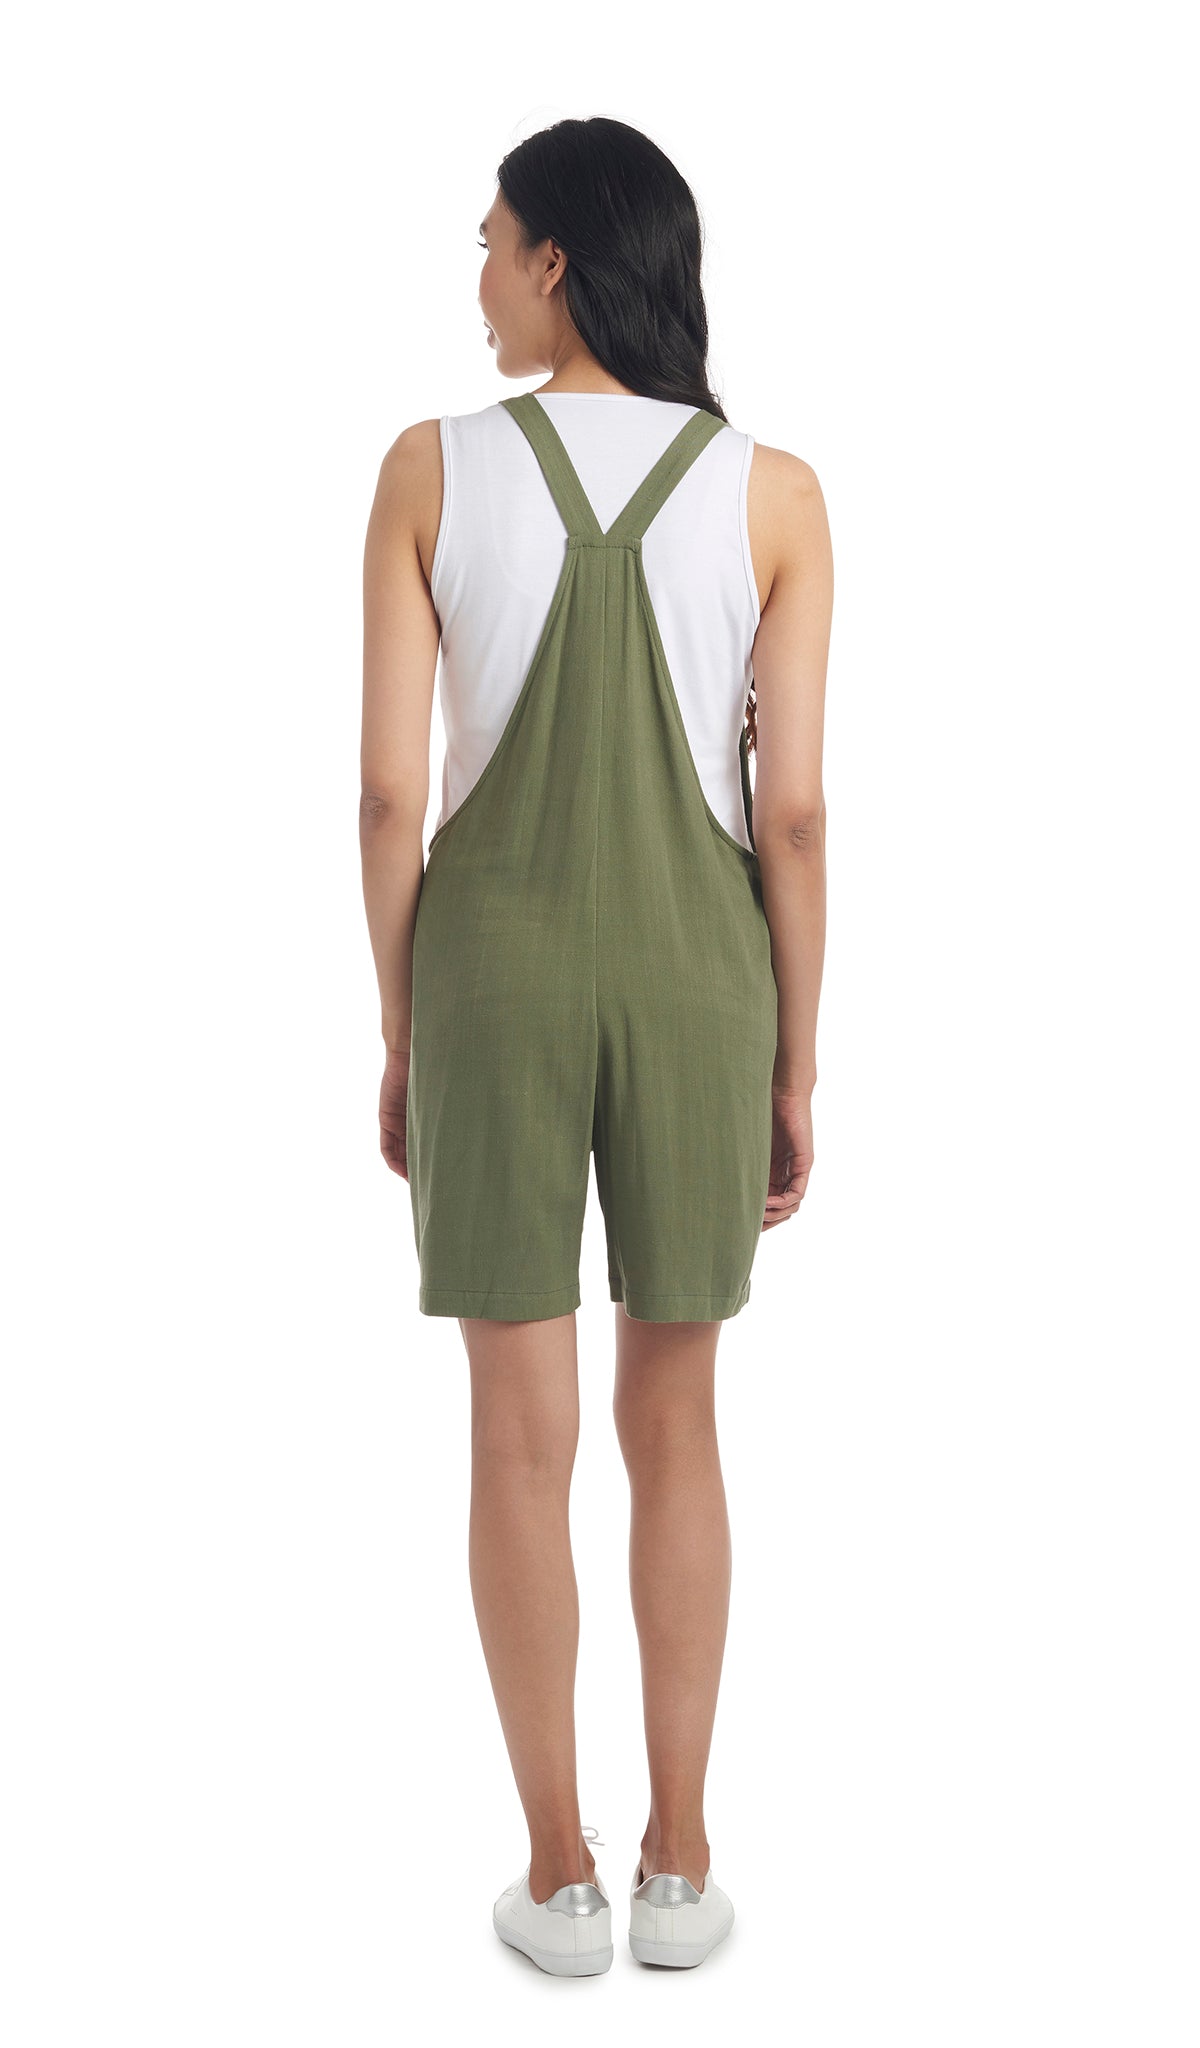 Olive Jodi overall back shot worn by woman with white tank top layered underneath.